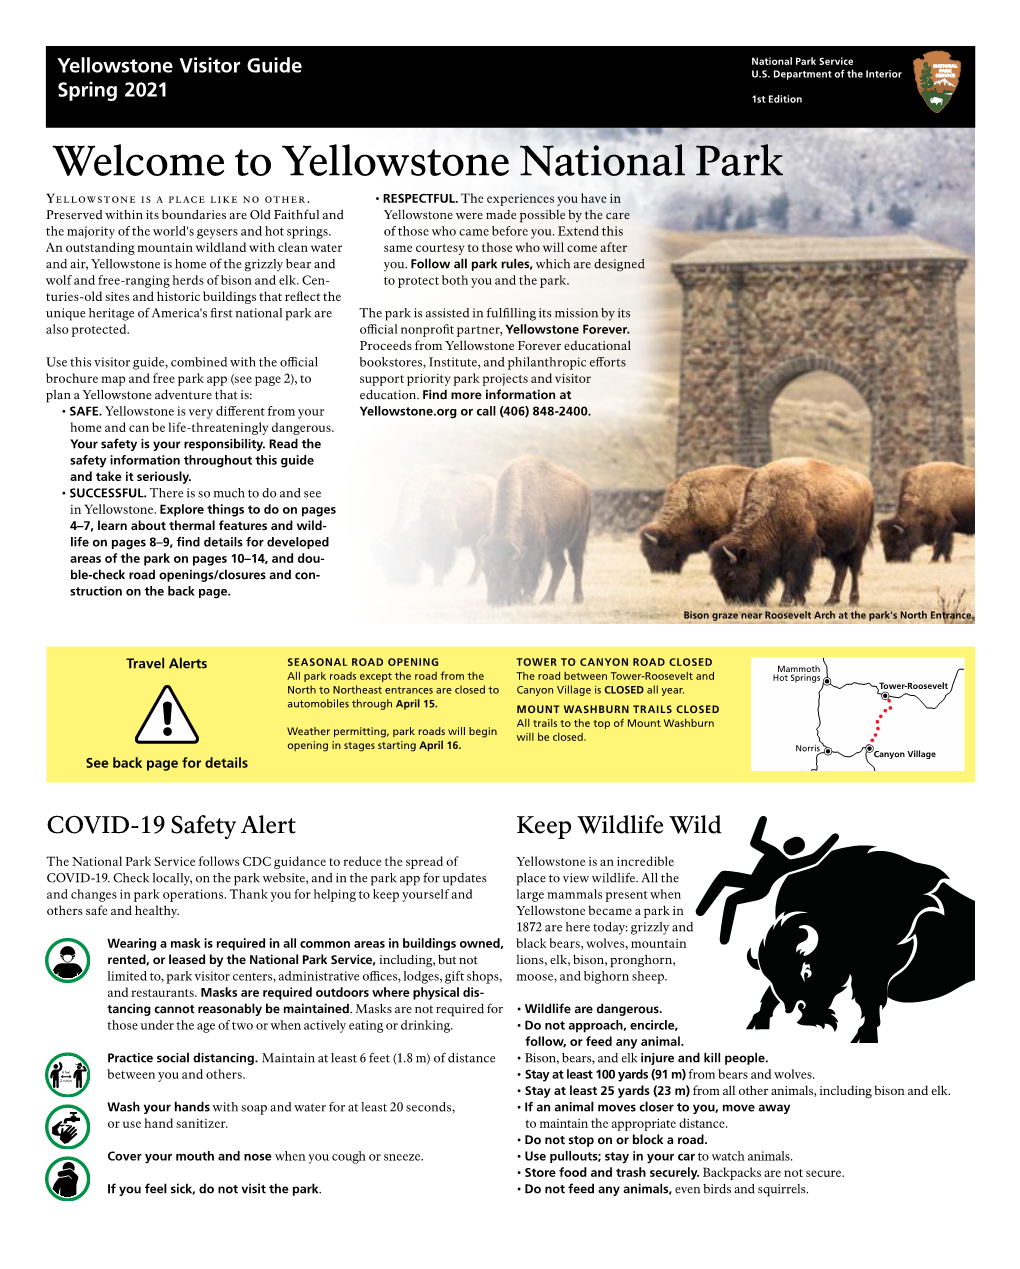 Yellowstone Visitor Guide Spring 2021